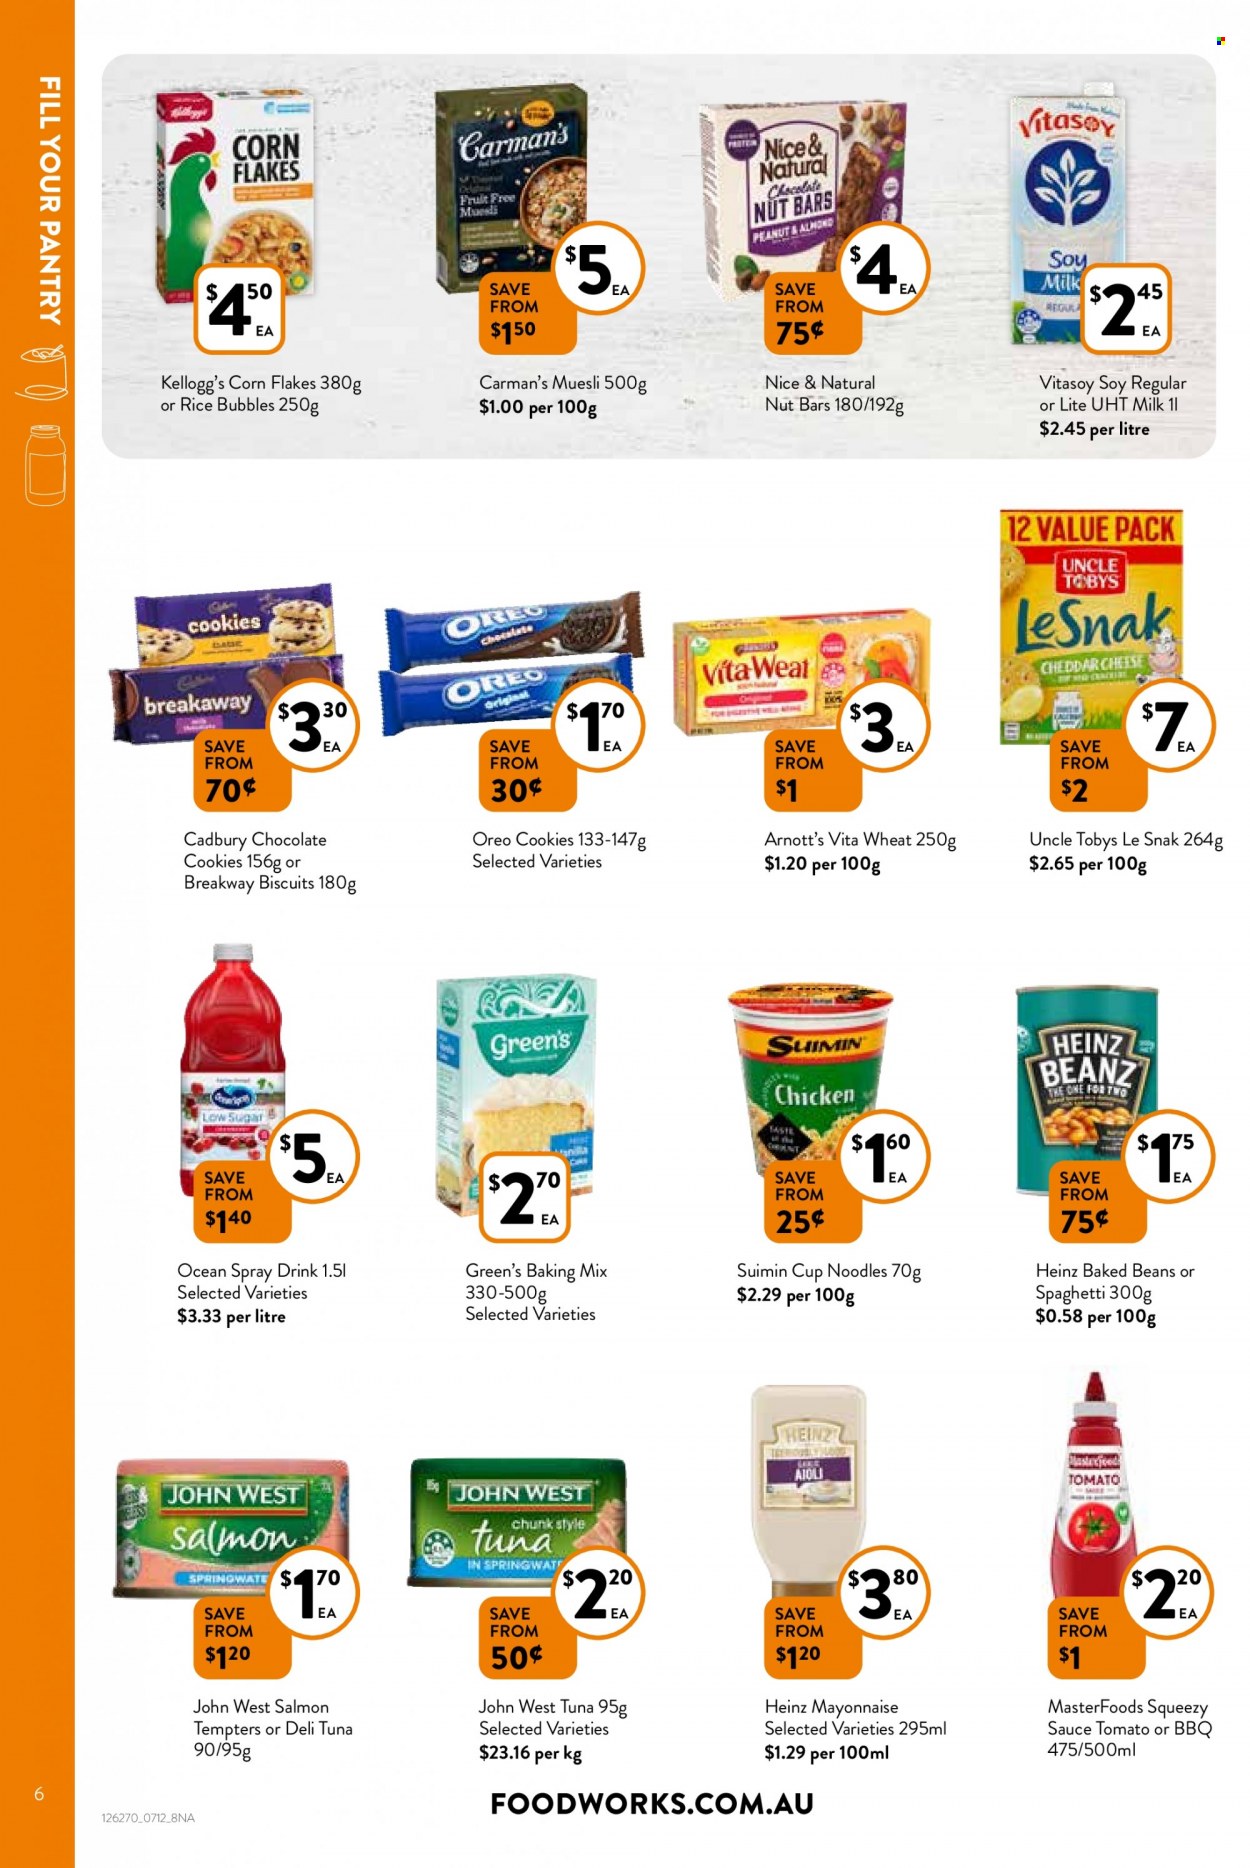 thumbnail - Foodworks Catalogue - 7 Dec 2022 - 13 Dec 2022 - Sales products - beans, salmon, tuna, sauce, noodles cup, noodles, cheddar, cheese, Oreo, soy milk, Vitasoy, mayonnaise, cookies, chocolate, chocolate cookies, Kellogg's, biscuit, Cadbury, Le Snak, baking mix, Heinz, baked beans, corn flakes, nut bar, muesli. Page 6.